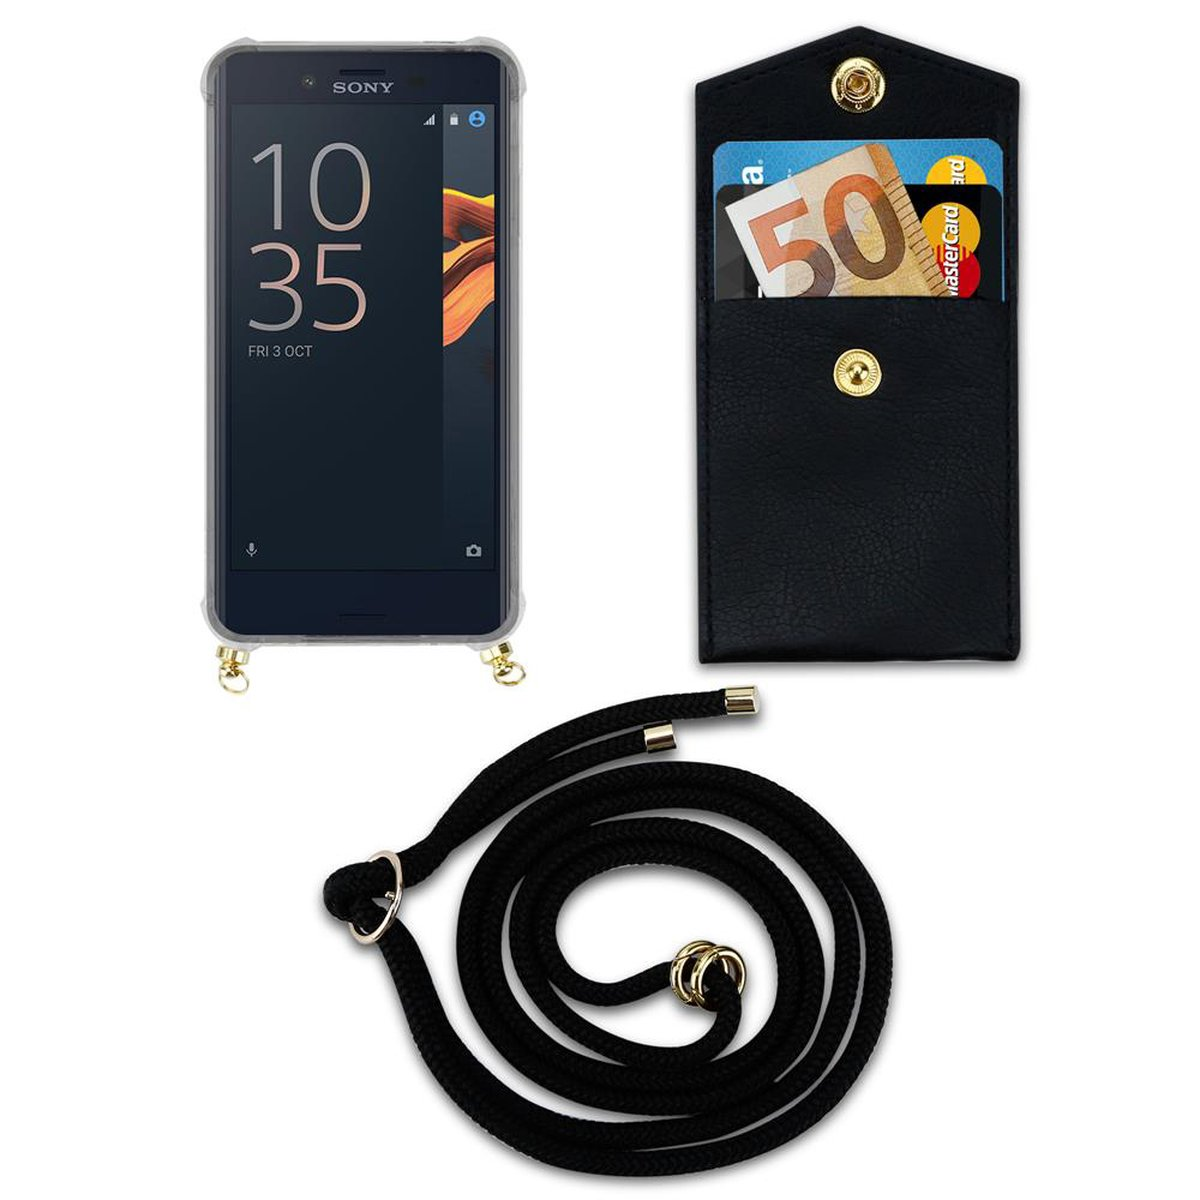 Kordel Hülle, Gold Kette abnehmbarer mit Sony, Backcover, Ringen, Xperia Band CADORABO X und SCHWARZ Handy COMPACT,